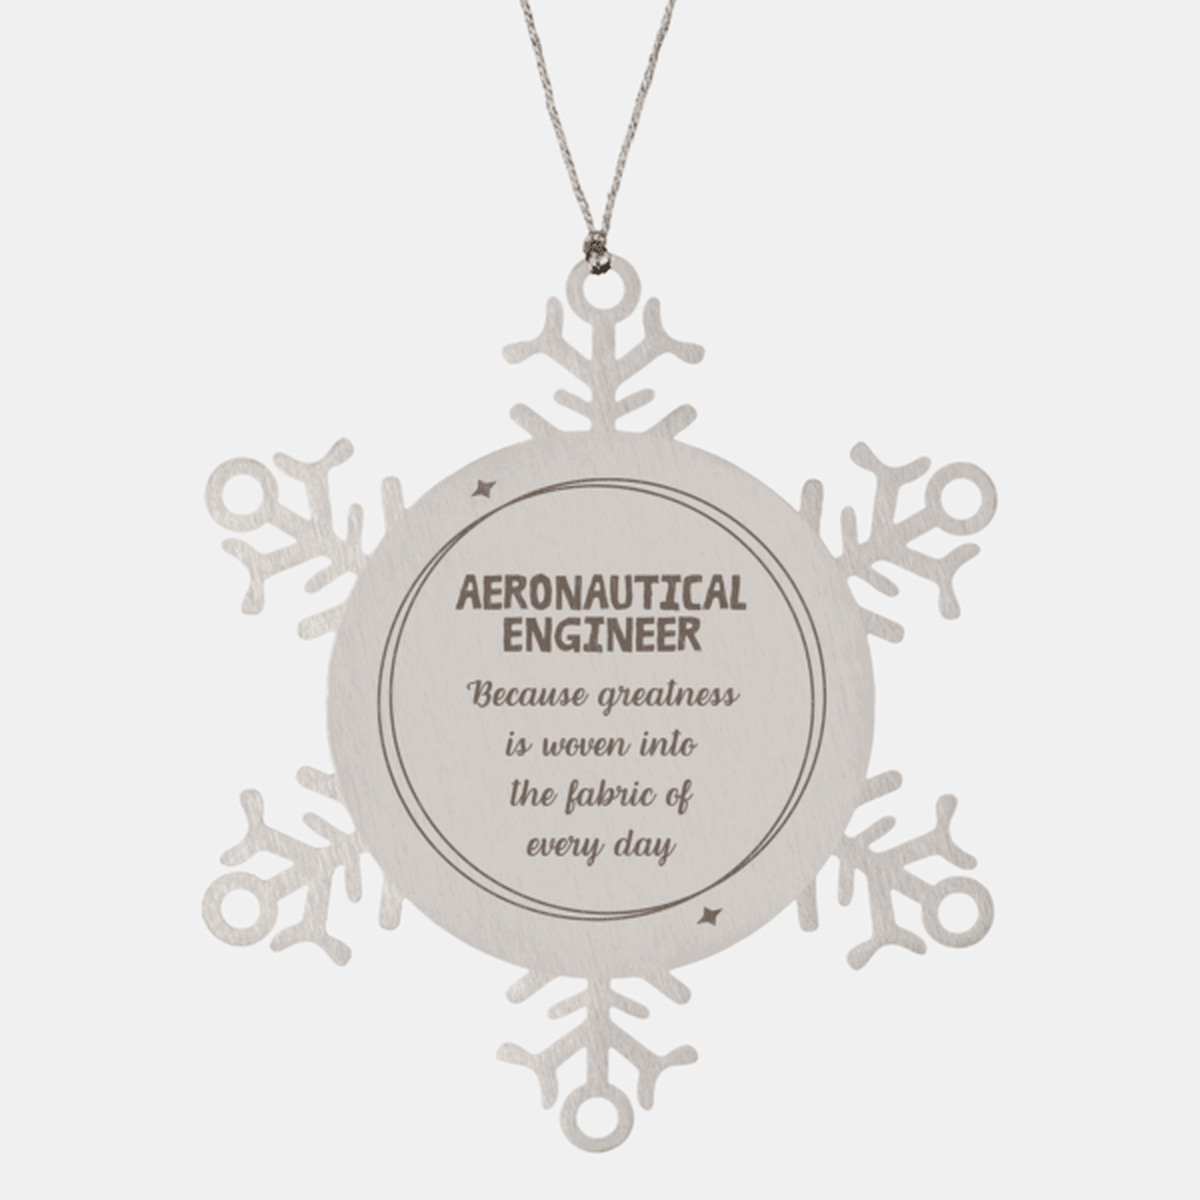 Sarcastic Aeronautical Engineer Snowflake Ornament Gifts, Christmas Holiday Gifts for Aeronautical Engineer Ornament, Aeronautical Engineer: Because greatness is woven into the fabric of every day, Coworkers, Friends - Mallard Moon Gift Shop